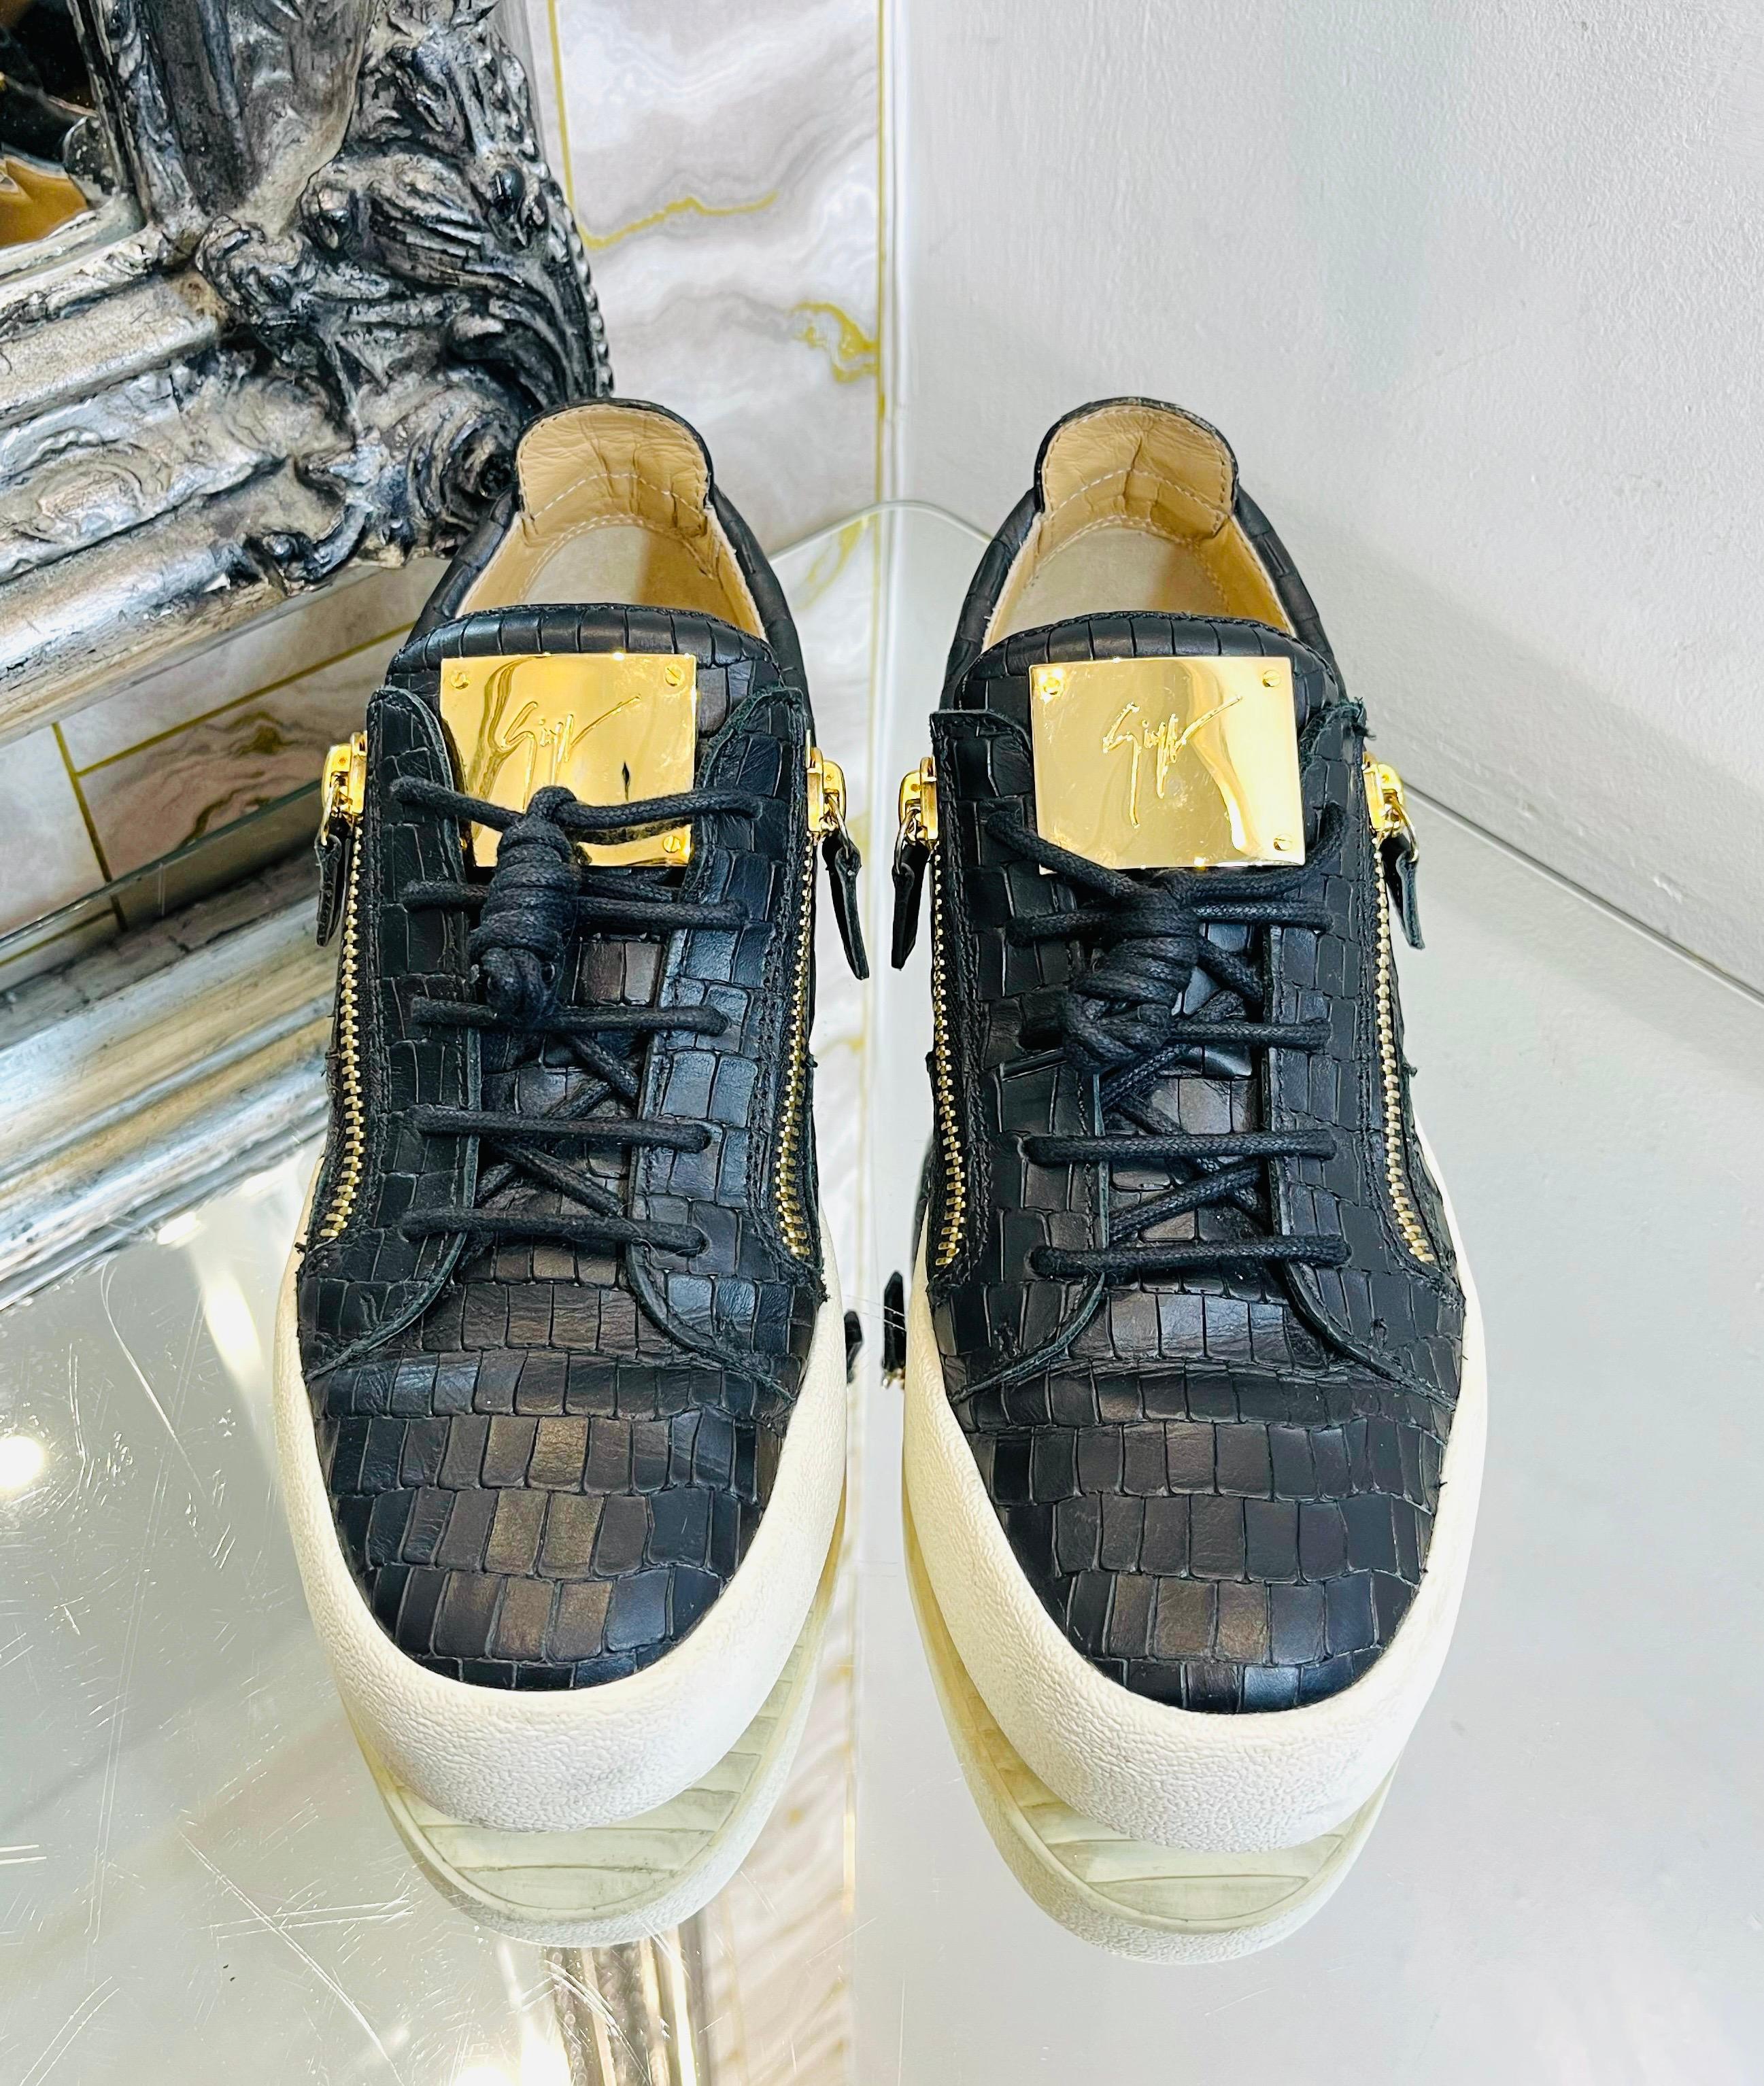 Giuseppe Zanotti Croc Embossed Leather Sneakers

Black sneakers crafted from crocodile embossed leather.

Detailed with gold double zip accents to the sides and 'Giuseppe Zanotti' logo engraved plaque to the tongue.

Featuring round toe, lace-up